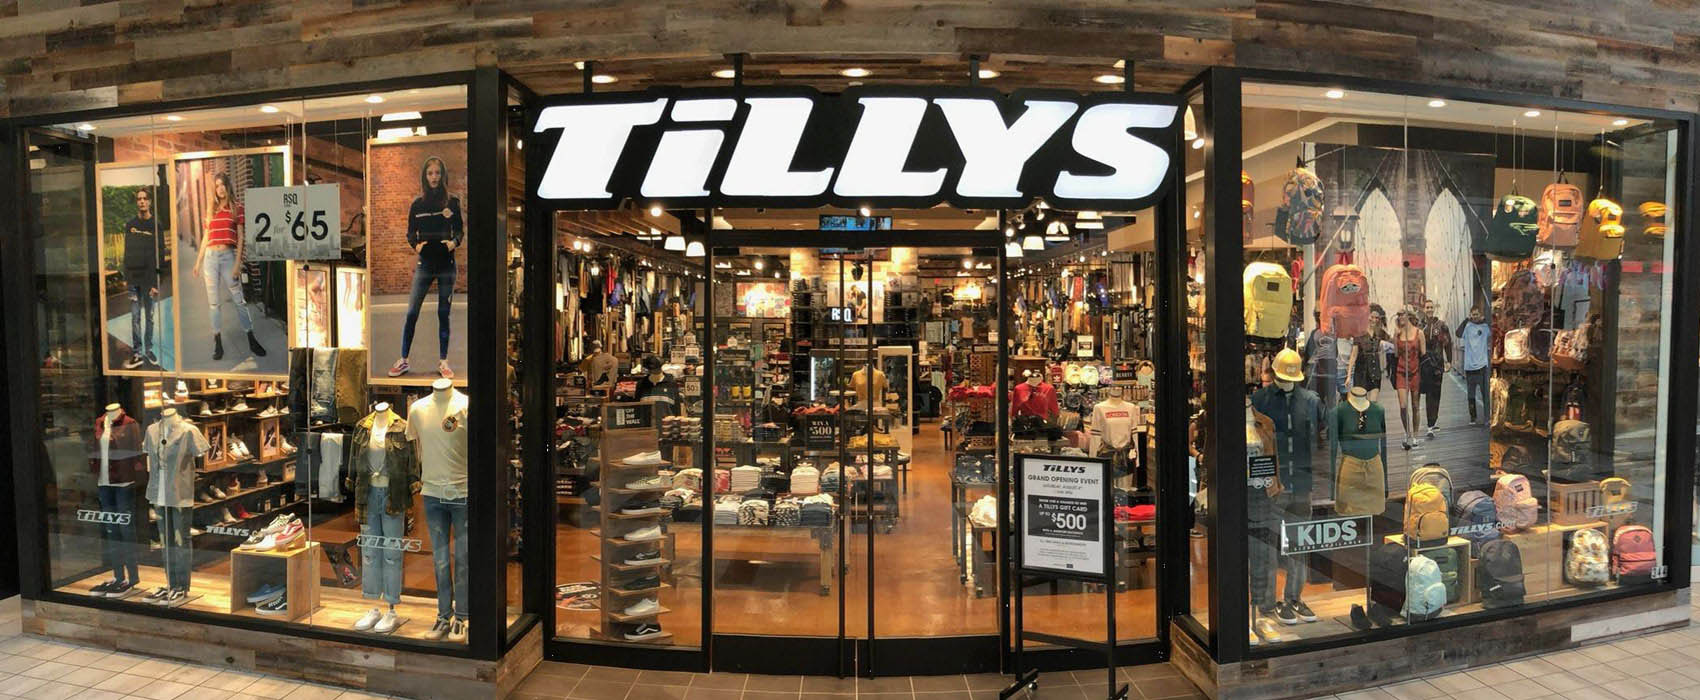 Tilly’s, Inc. Appoints EVP, Chief Merchandising Officer - Retail ...